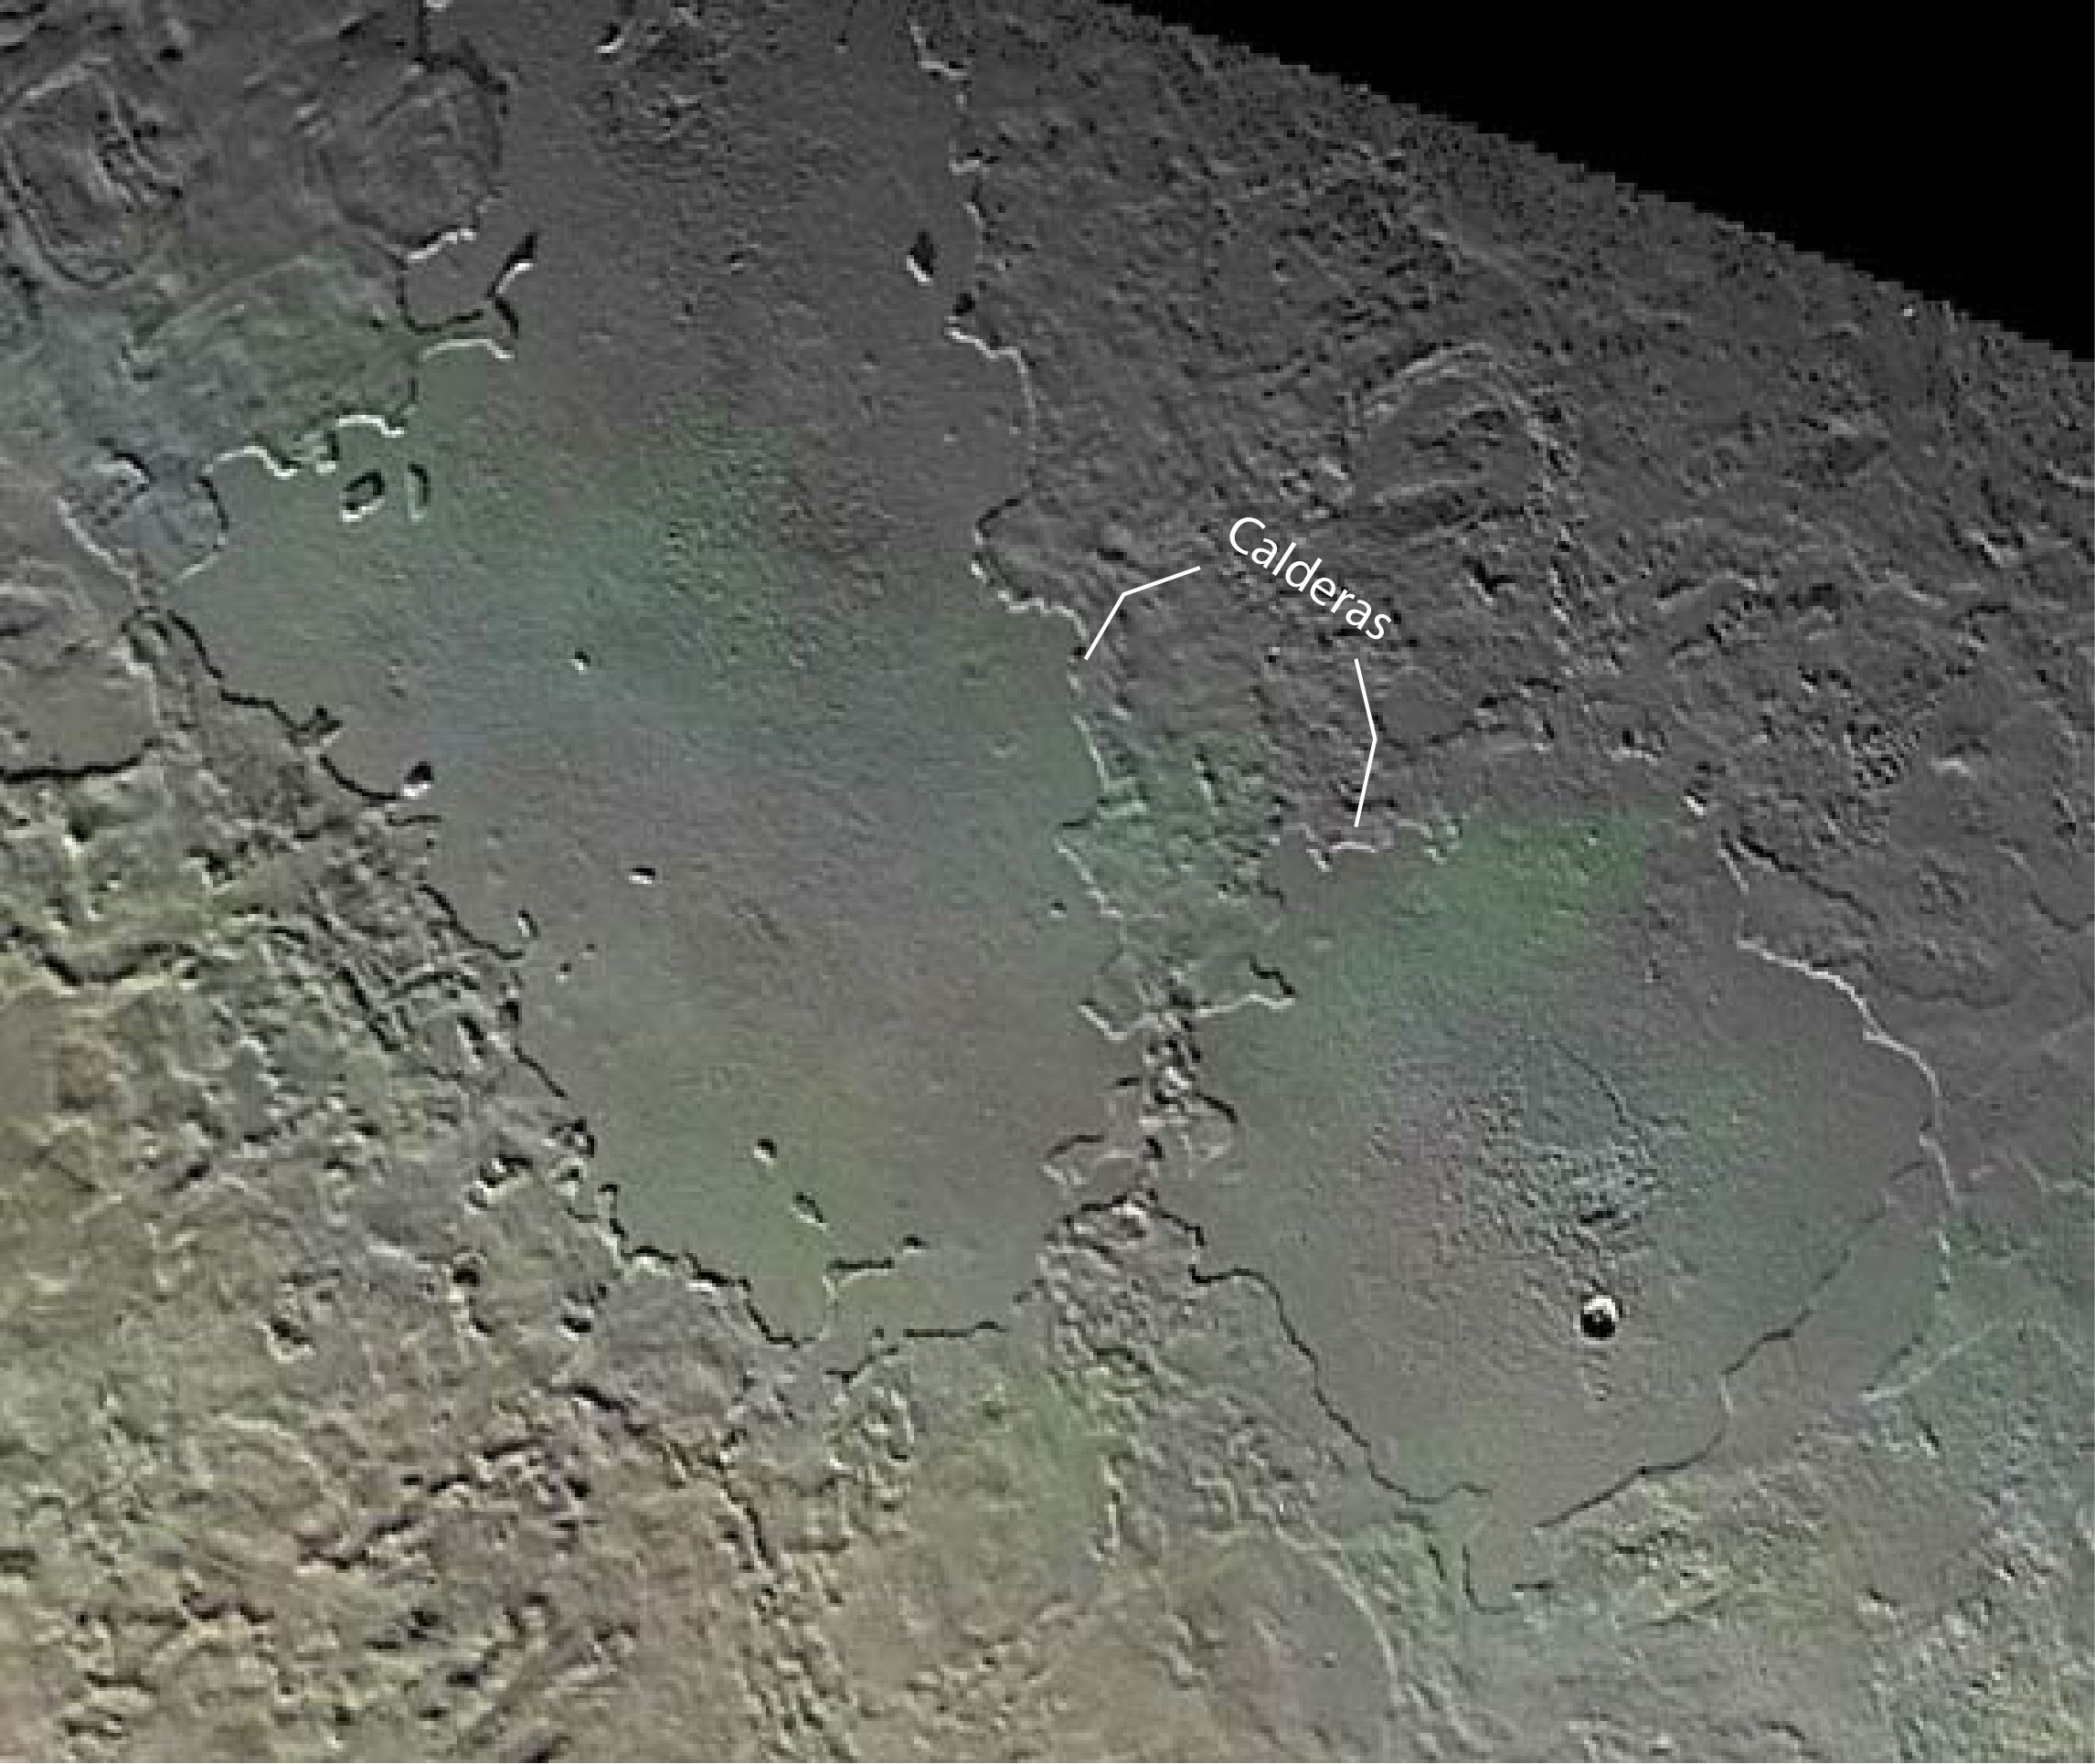 The flooded volcanic plains of Triton